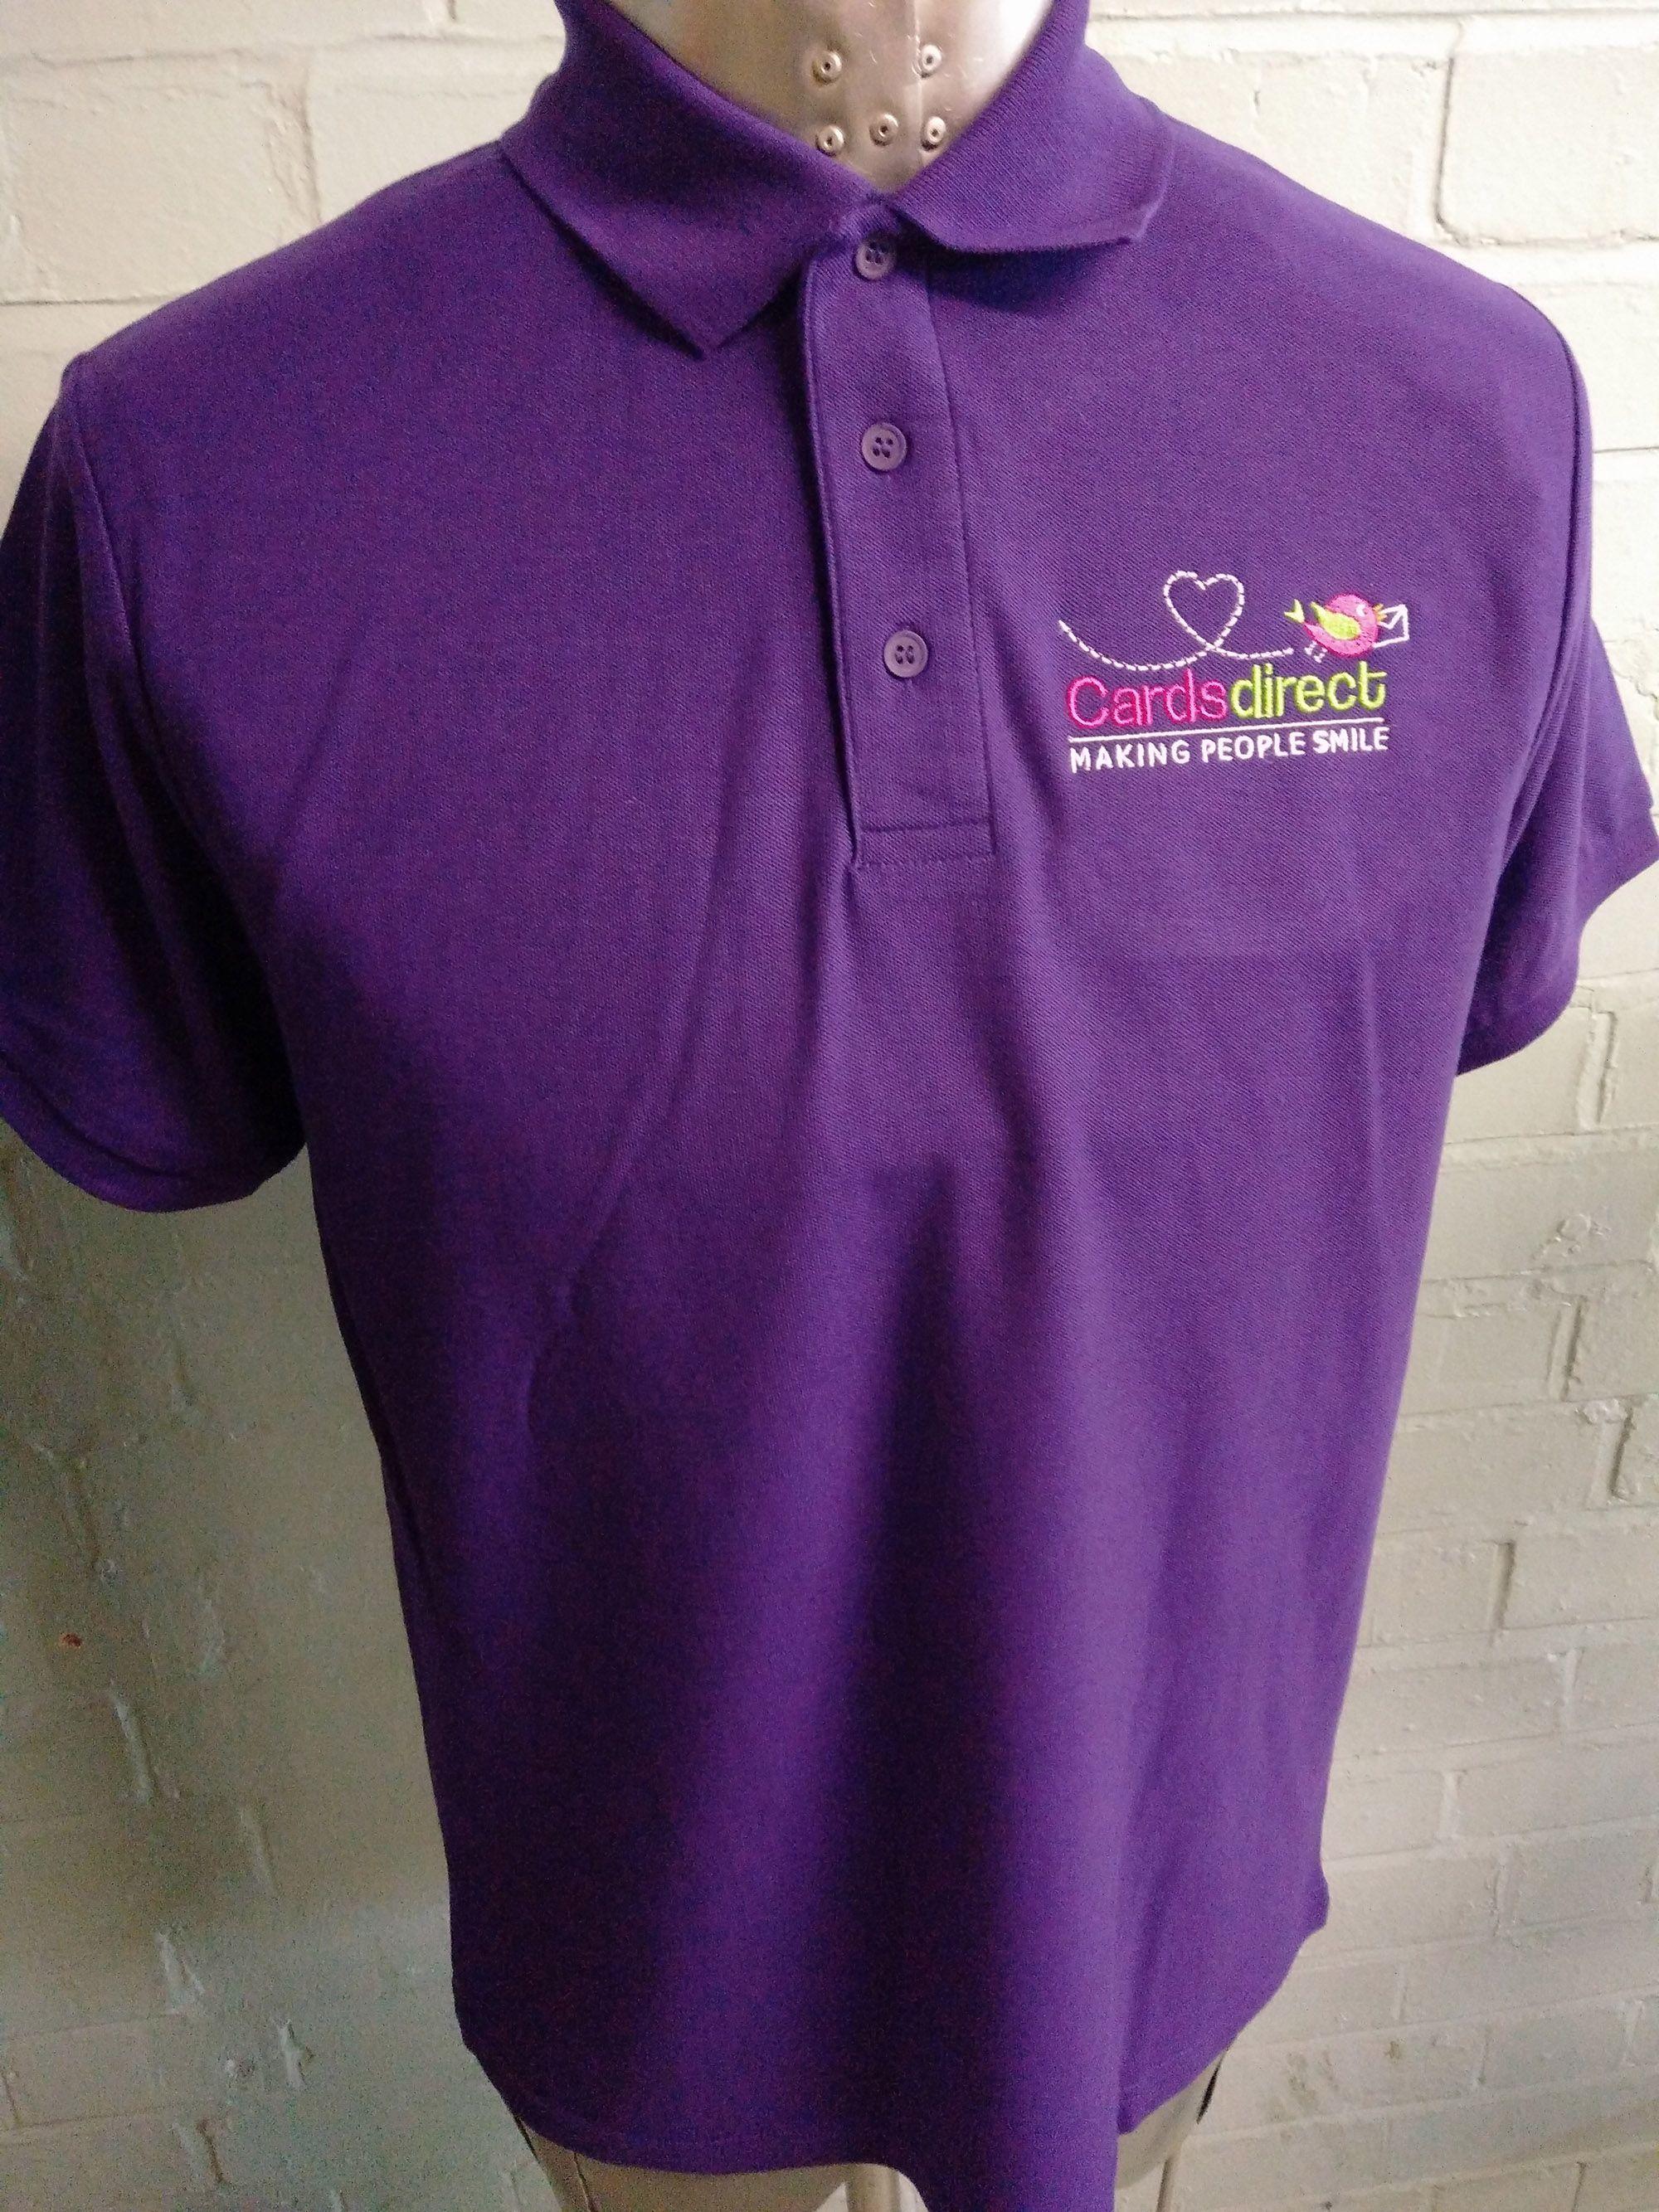 Lavender Polo Logo - Bright Purple Polo T-Shirts for Cards Direct with custom embroidered ...